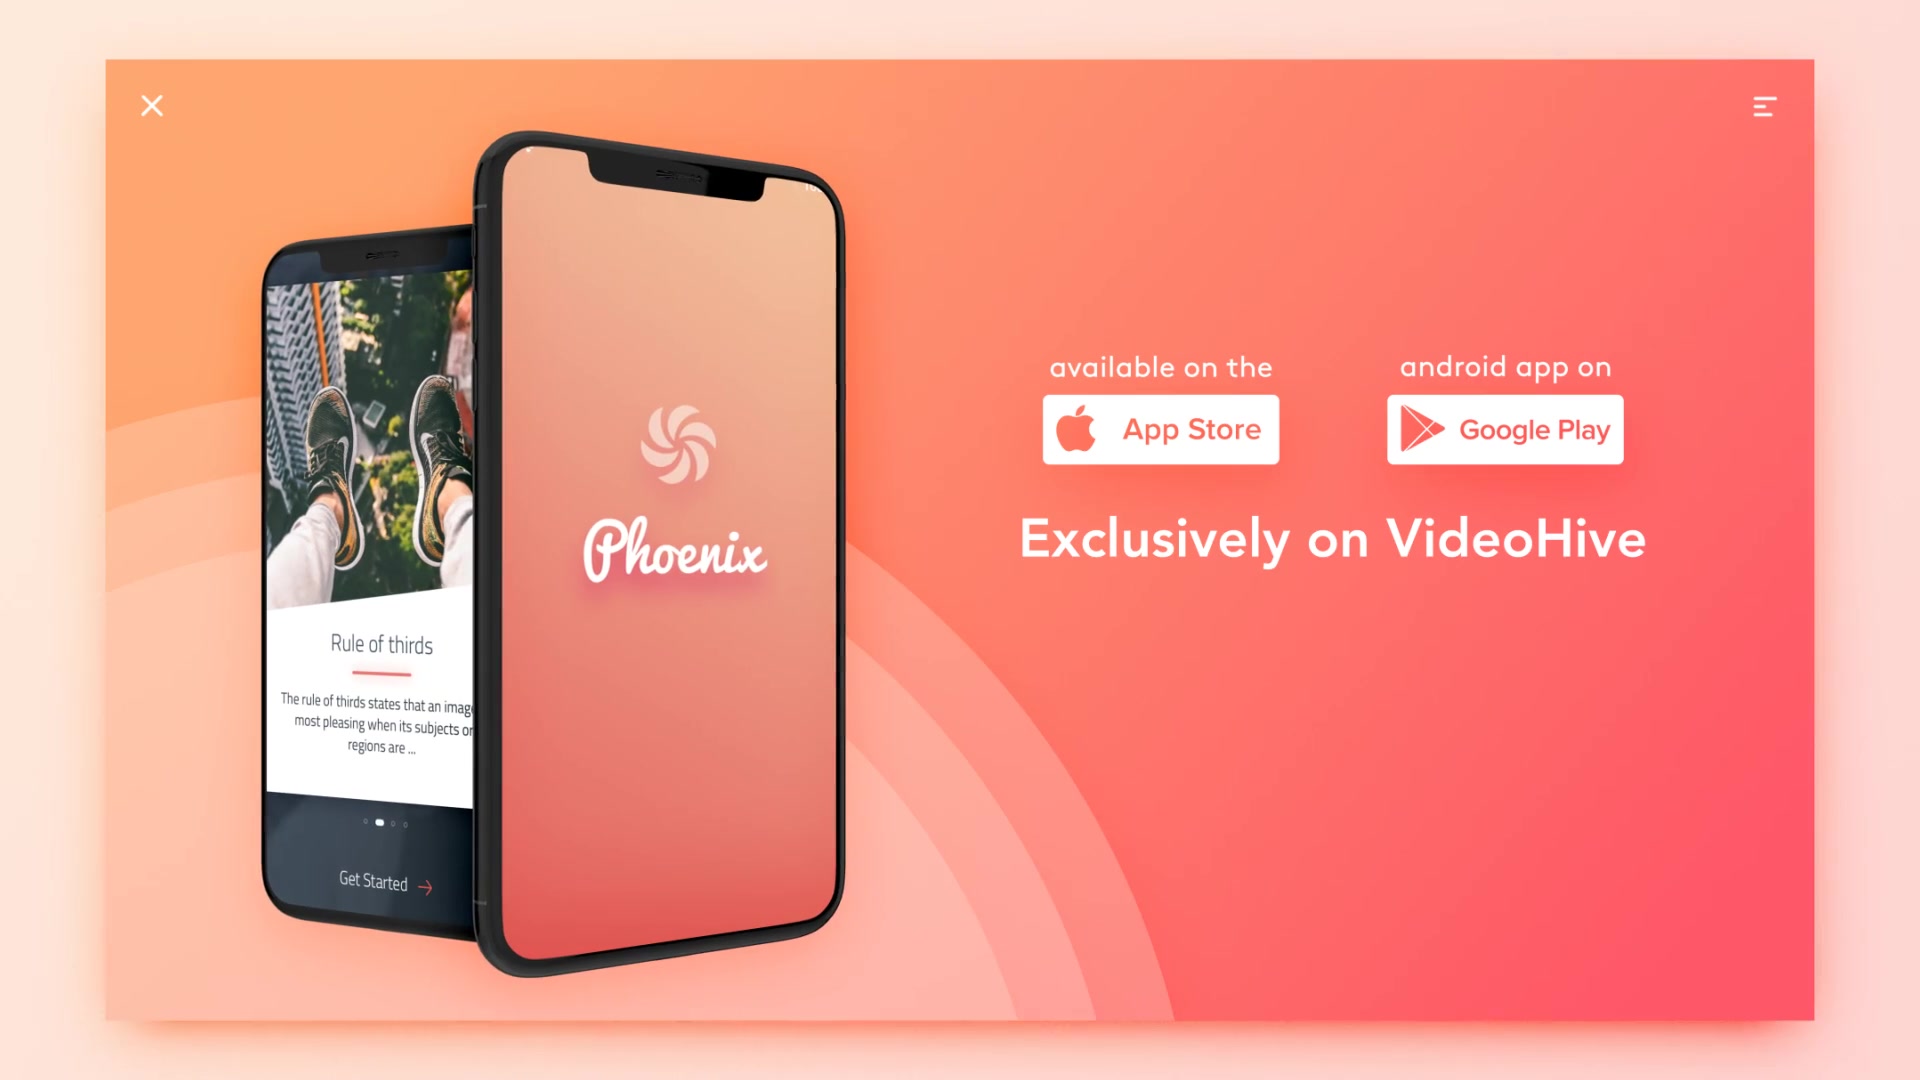 Mobile Product Promo - Download Videohive 21539123